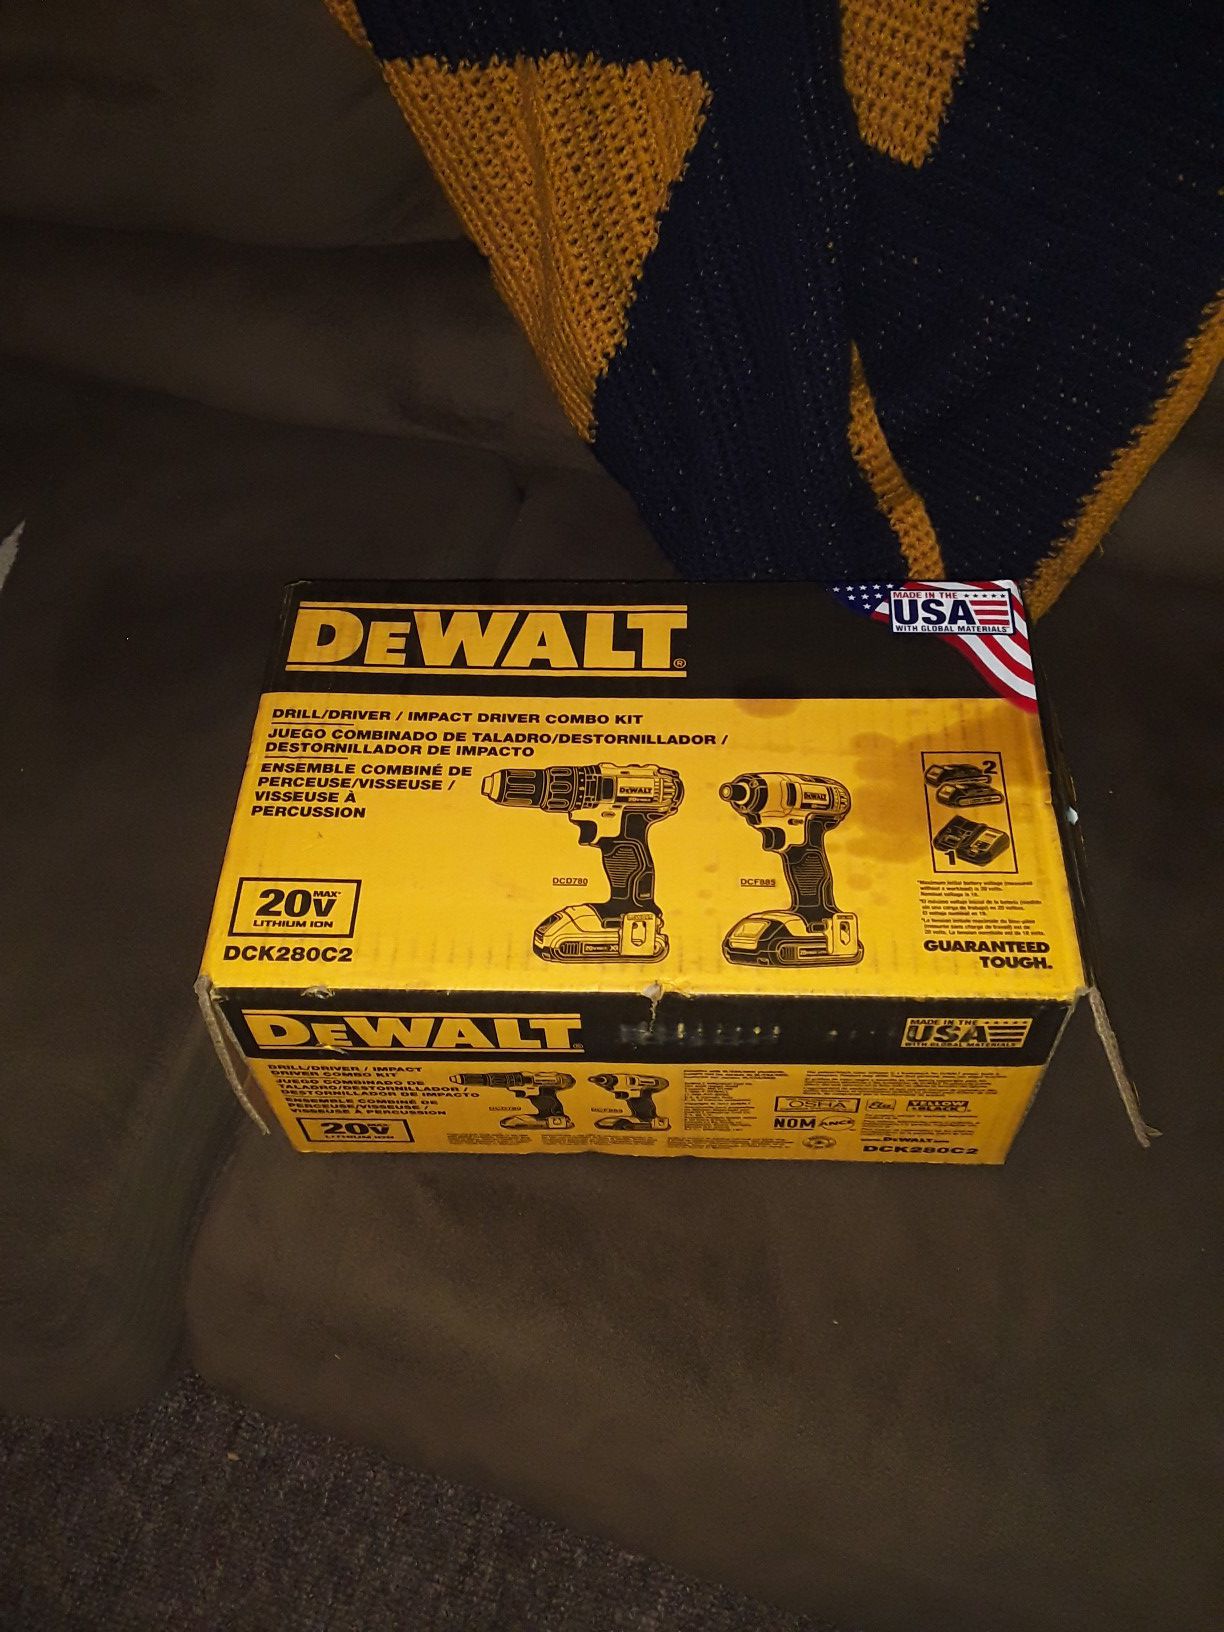 New 20 volt dewalt drill driver 2 batteries charger and bag. New in box